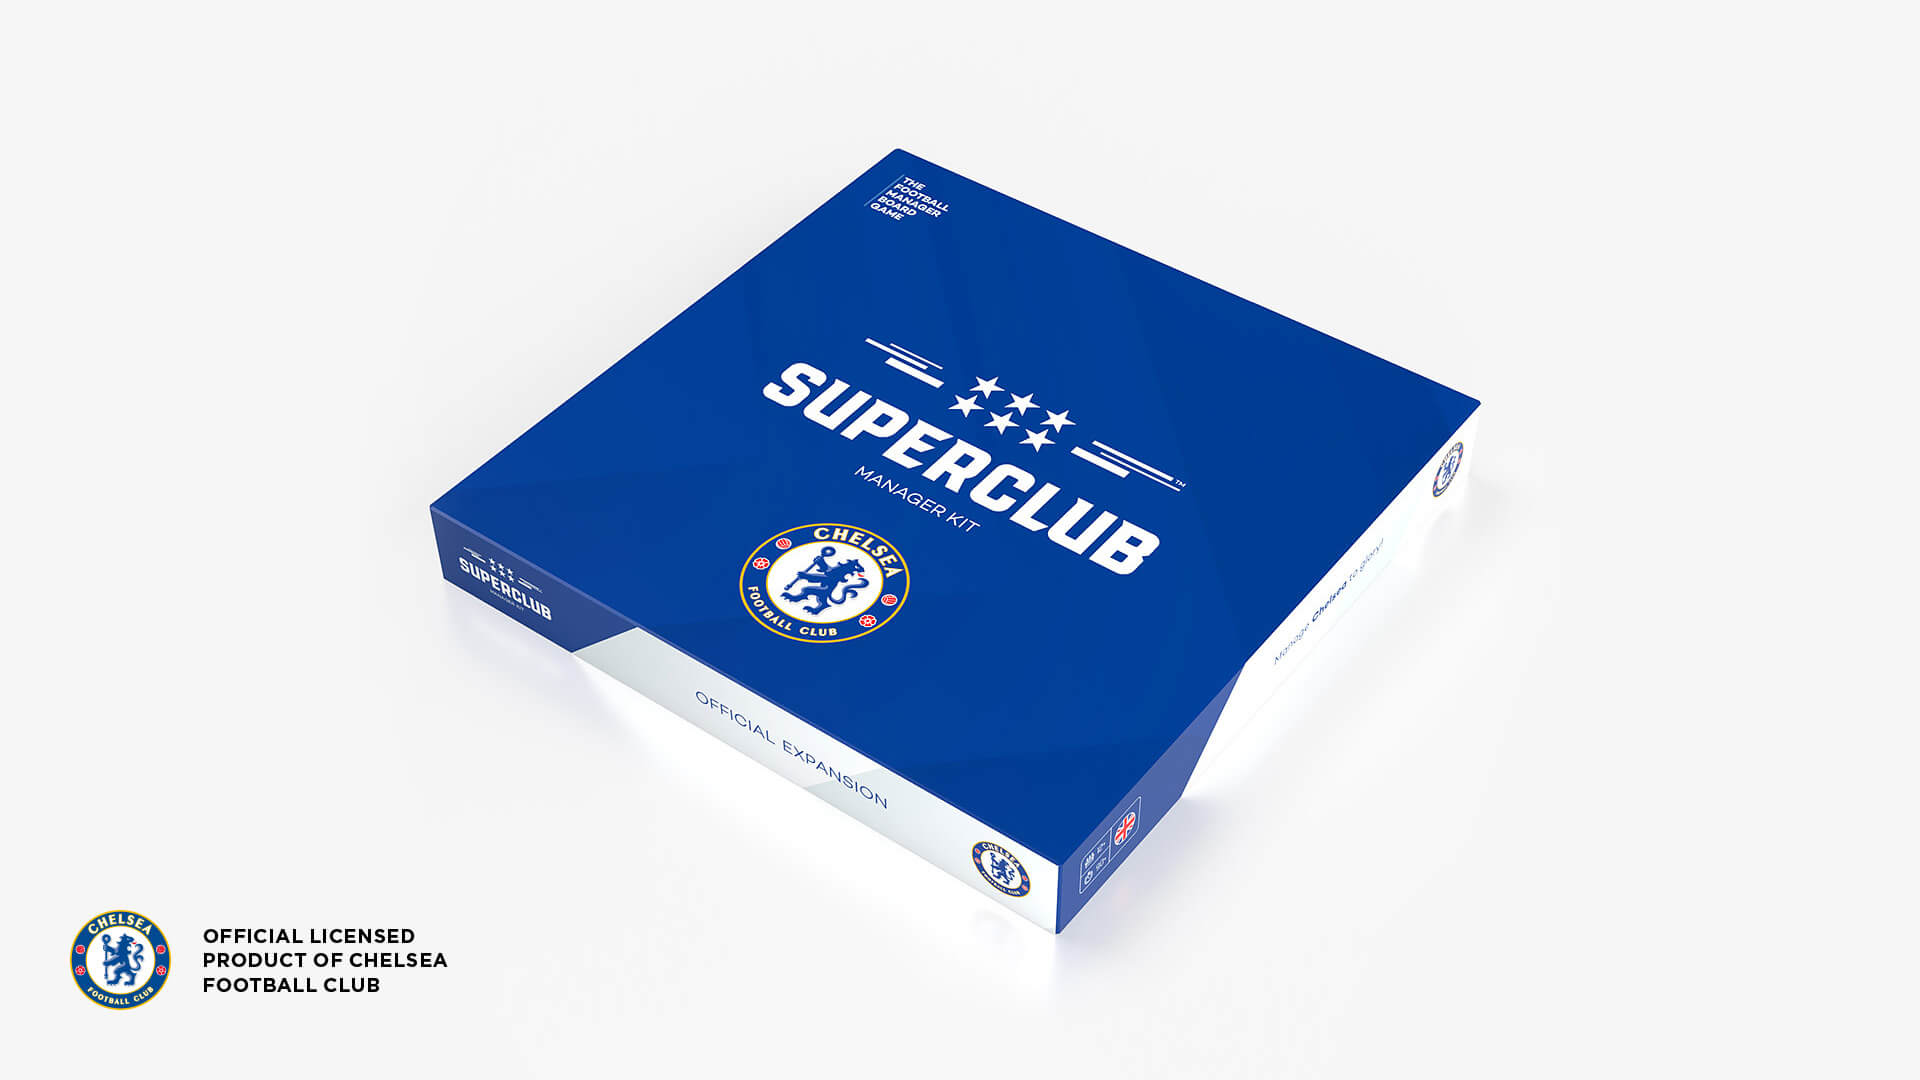 Chelsea FC will join the Superclub family